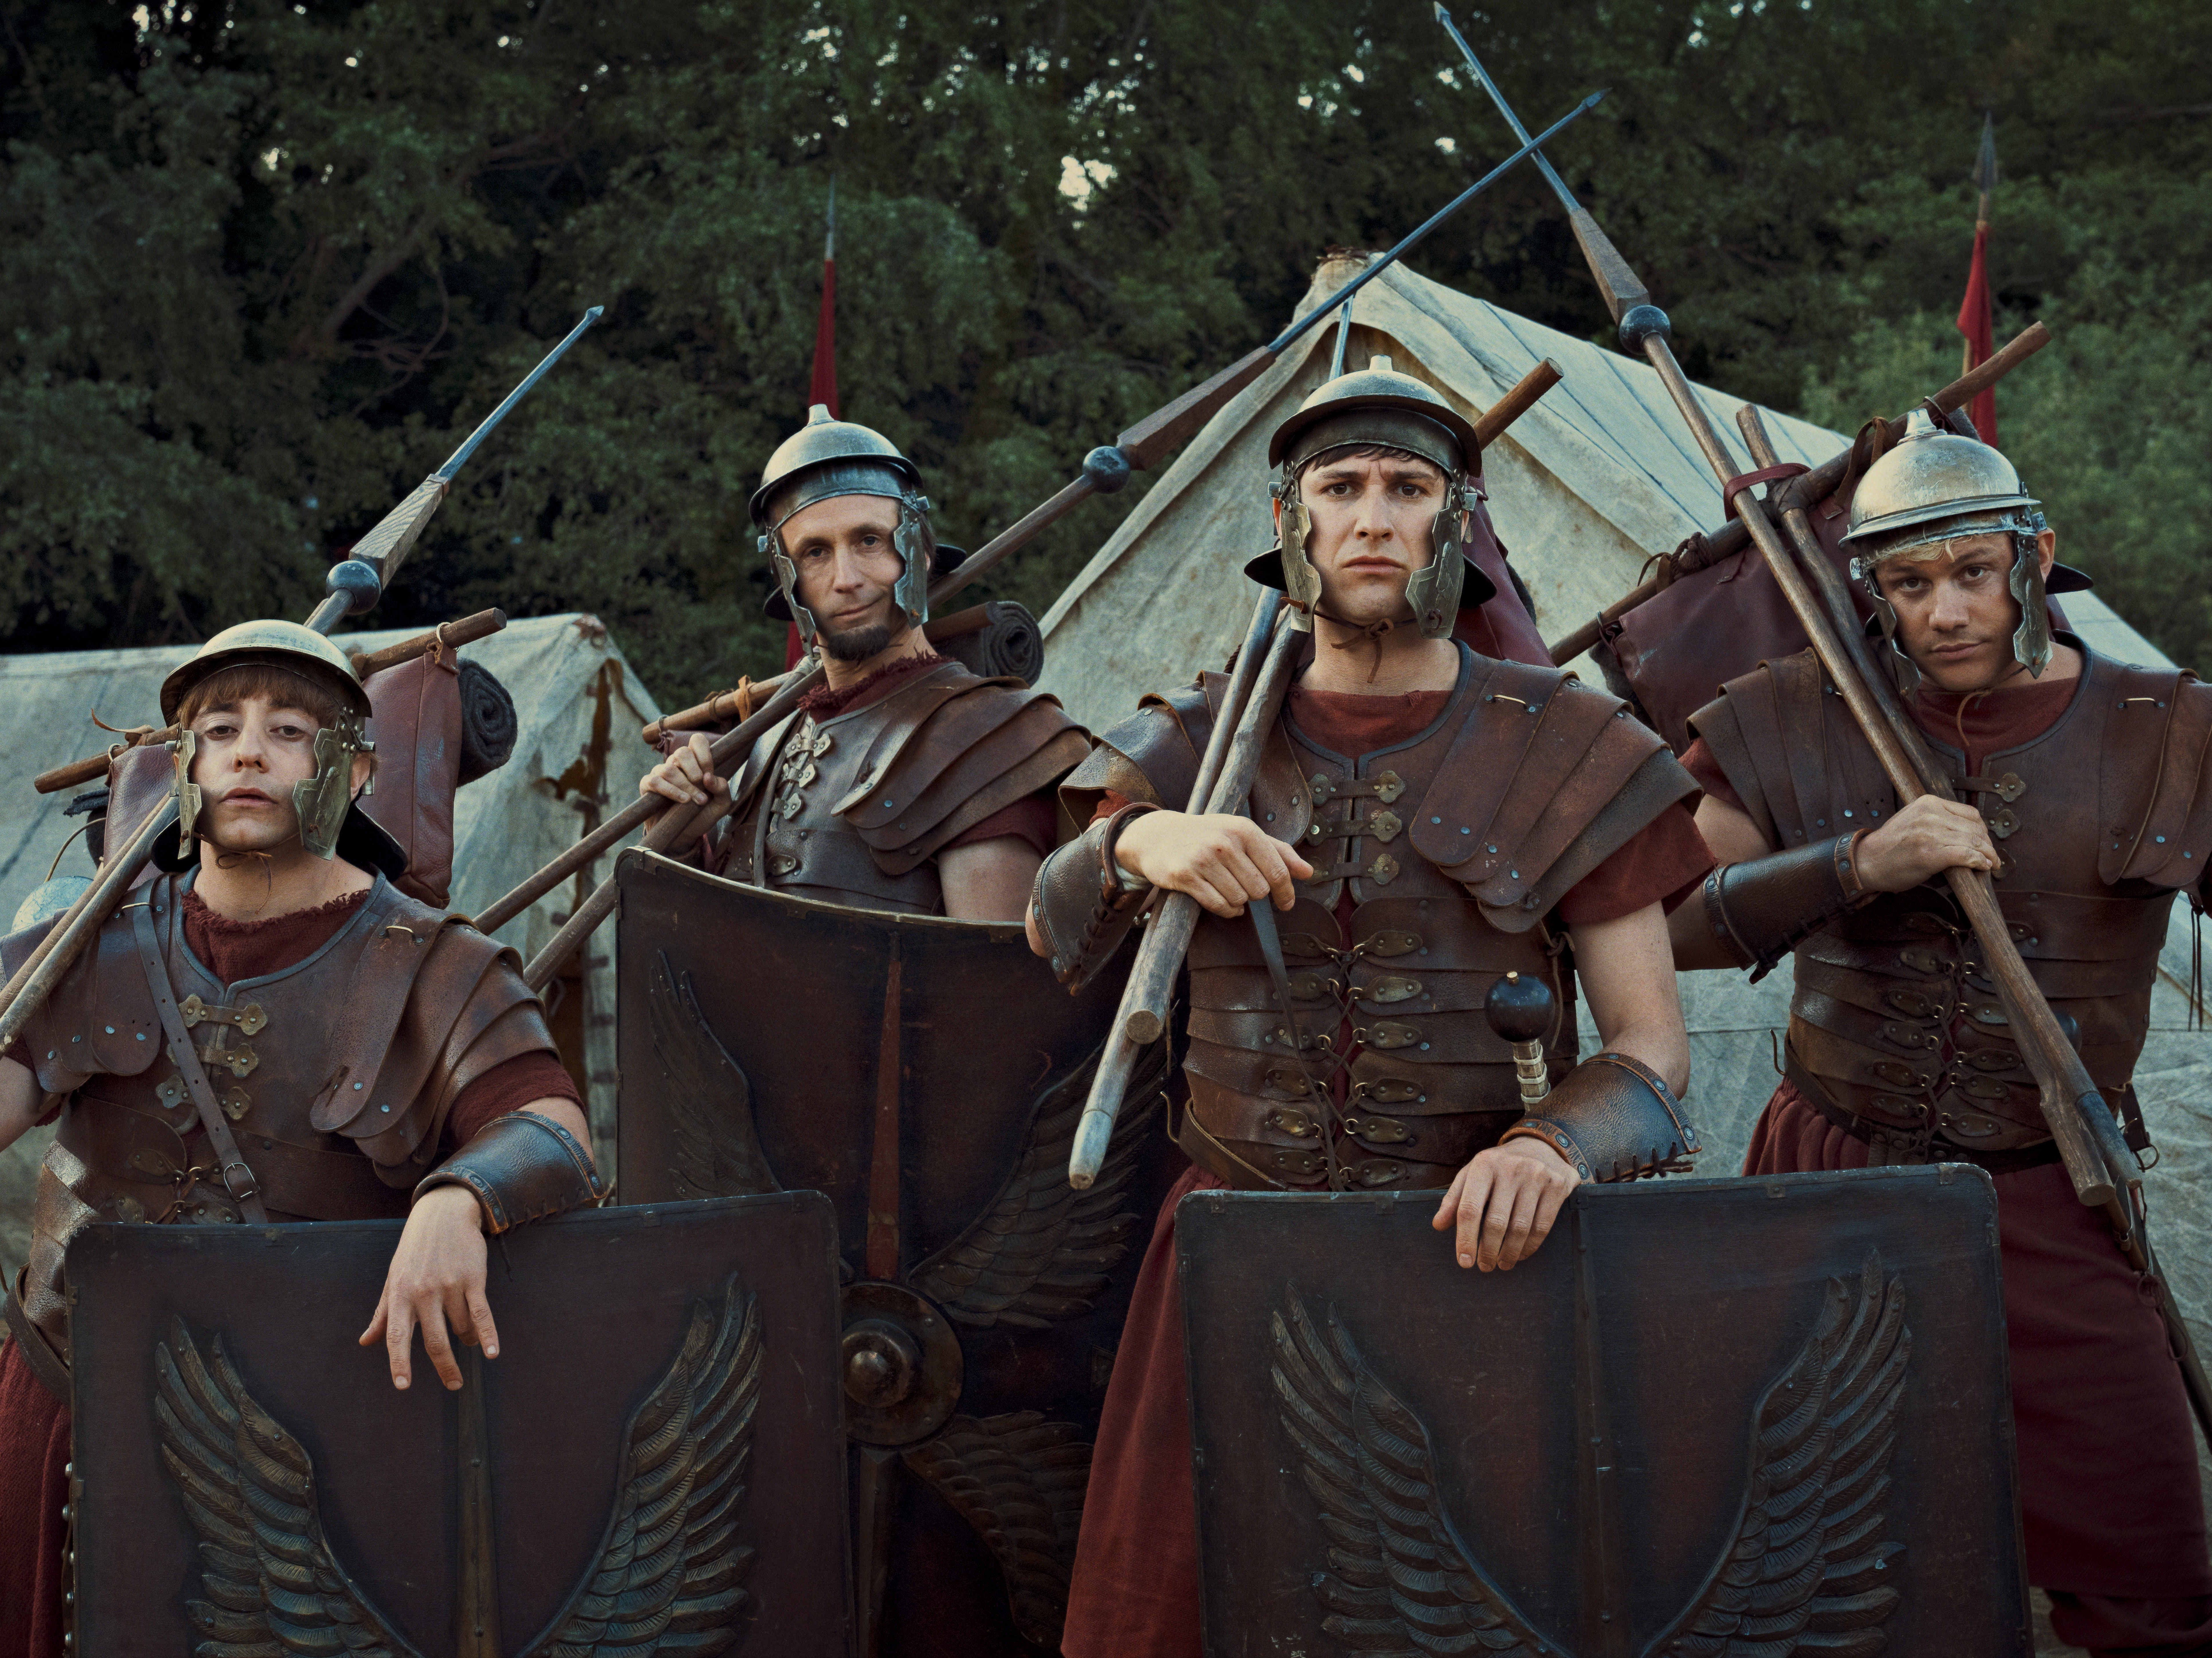 ‘Plebs: Soldiers of Rome’ is a last hurrah for the boys